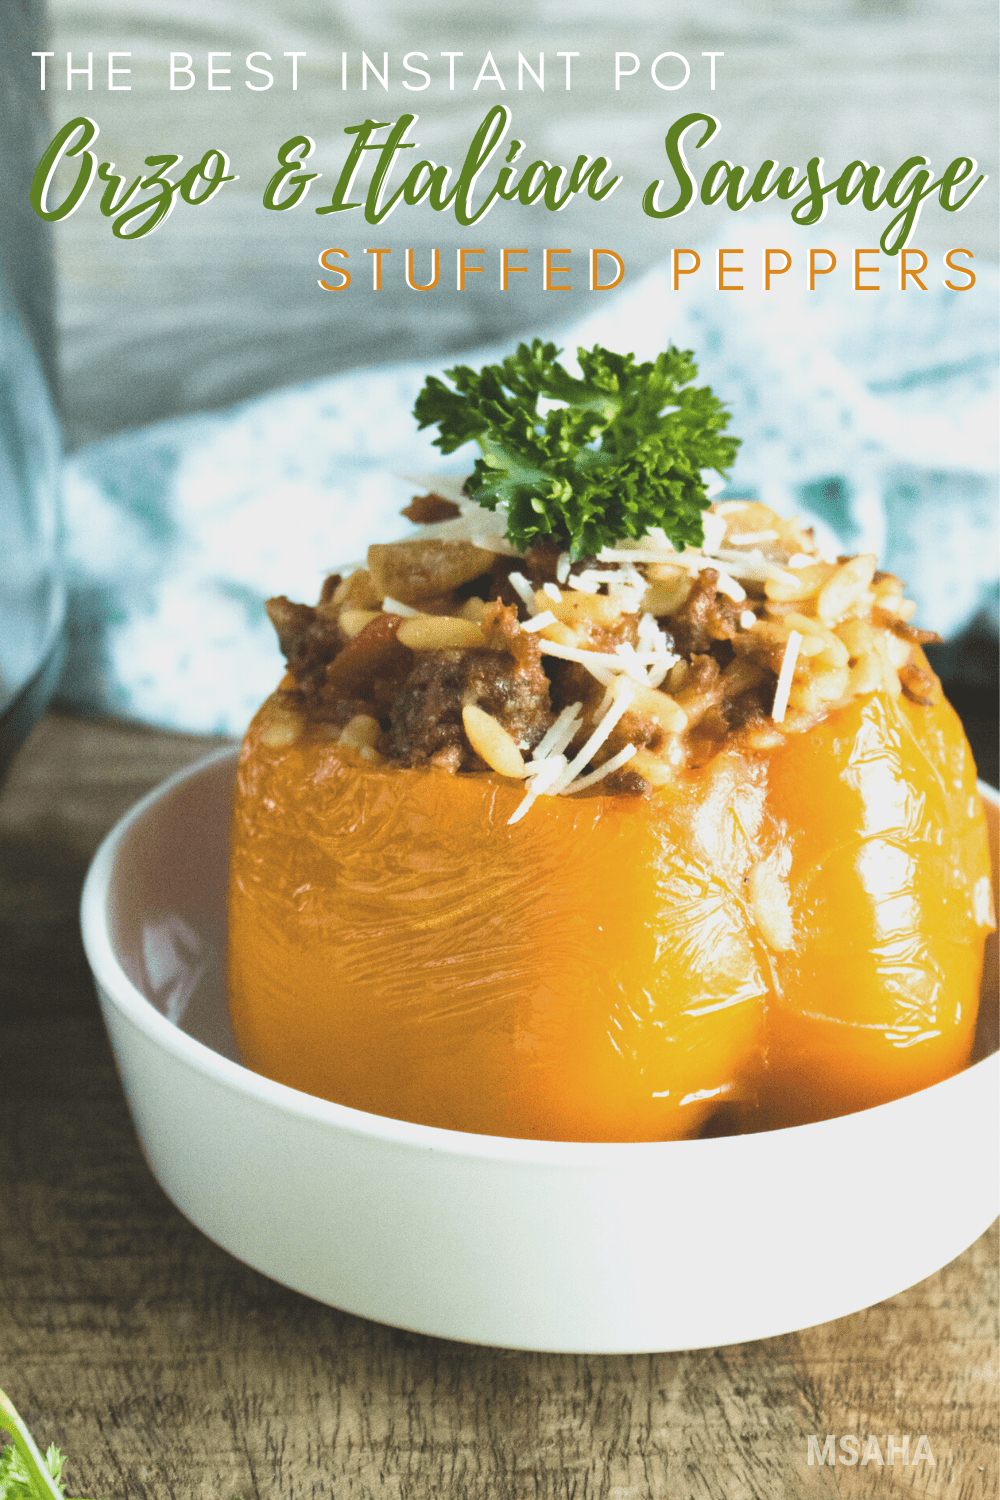 Learn how to make Instant Pot Orzo & Italian Sausage Stuffed Peppers that is so easy and delicious you and your family are going to love! #Instantpotrecipe #stuffedpeppers via @mystayathome